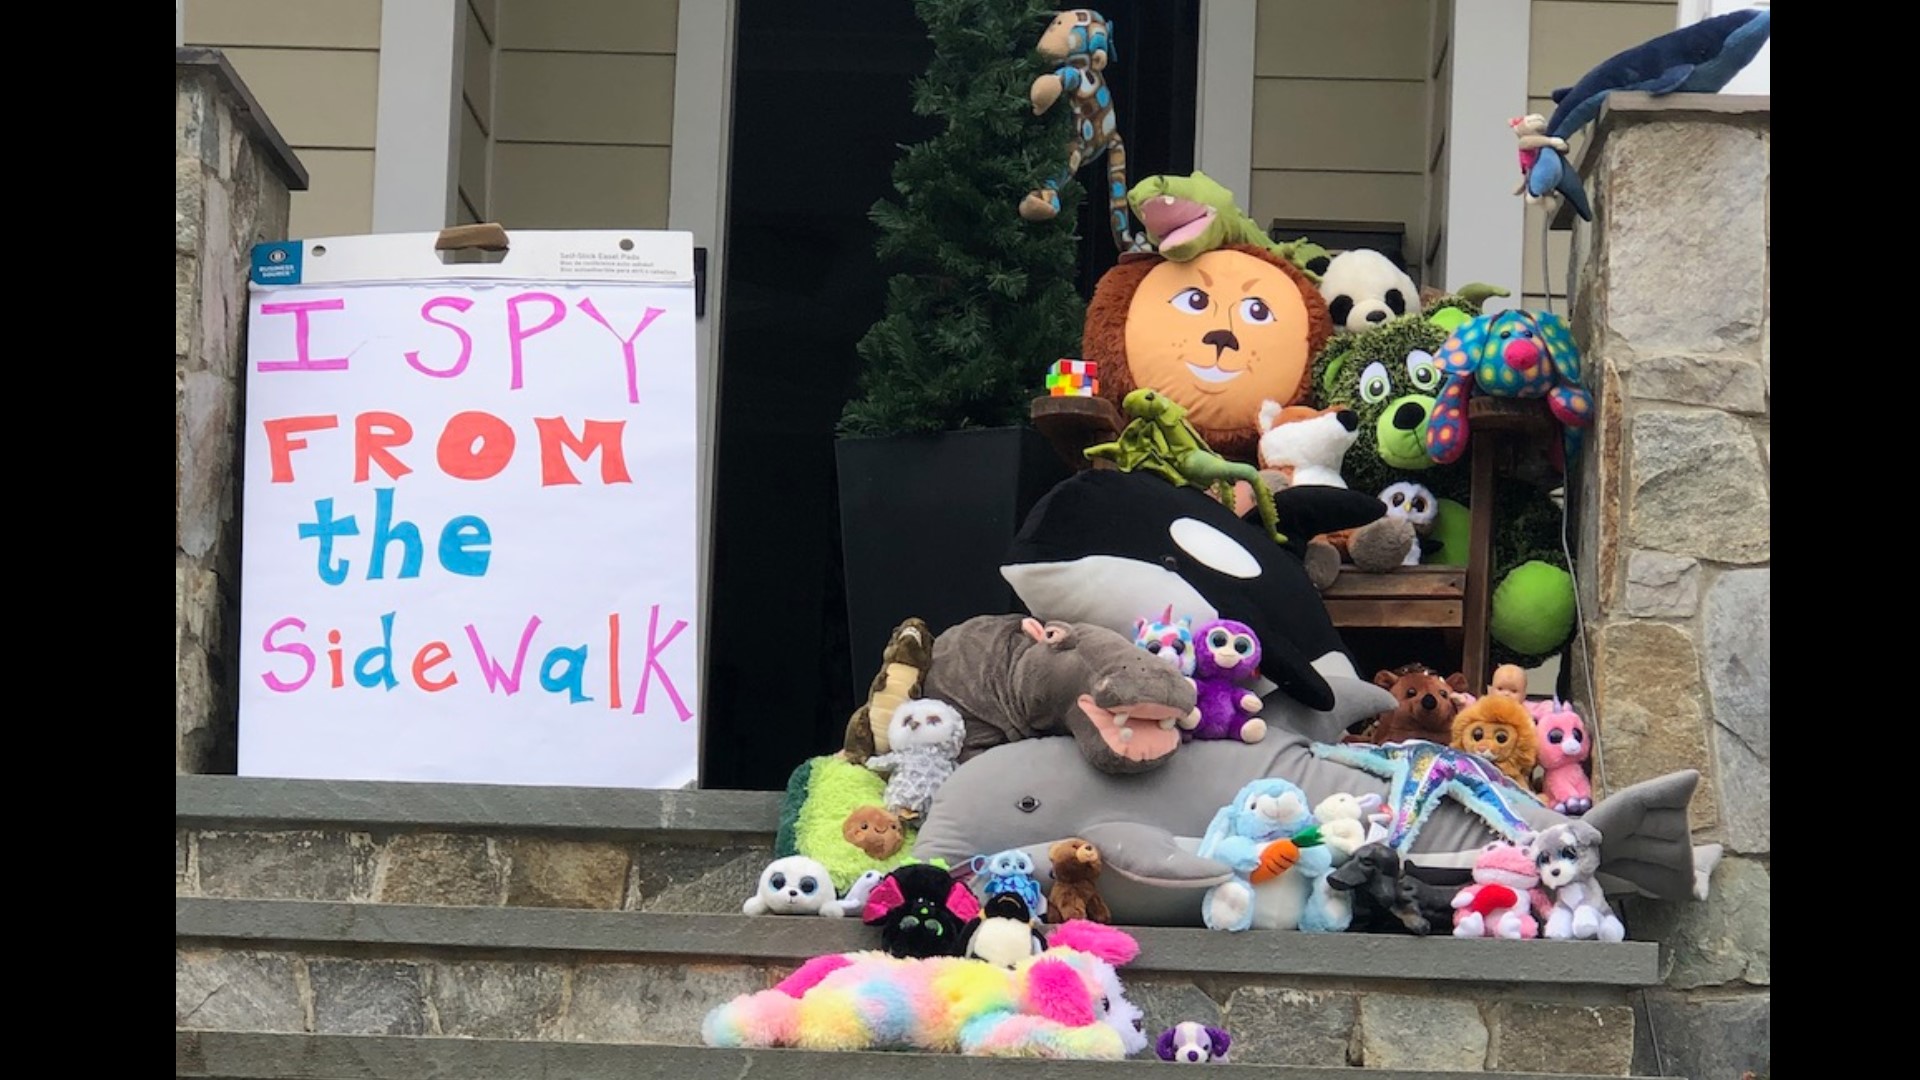 Mom creates I SPY on porch to entertain neighbors with young children.